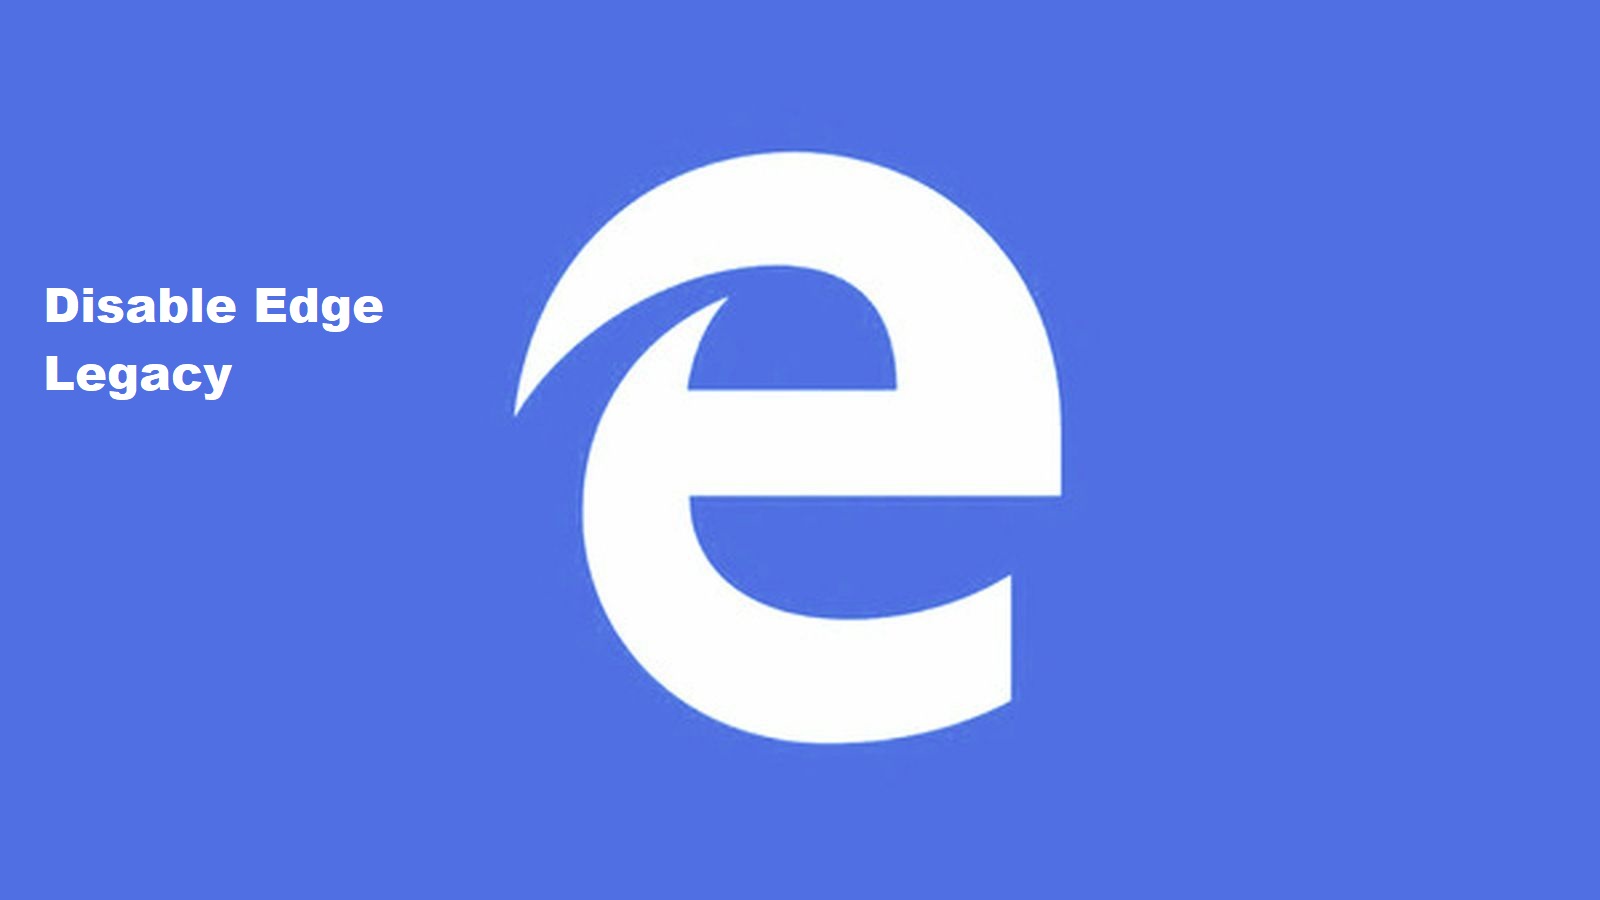 How to Disable Microsoft Edge Legacy in windows 10?